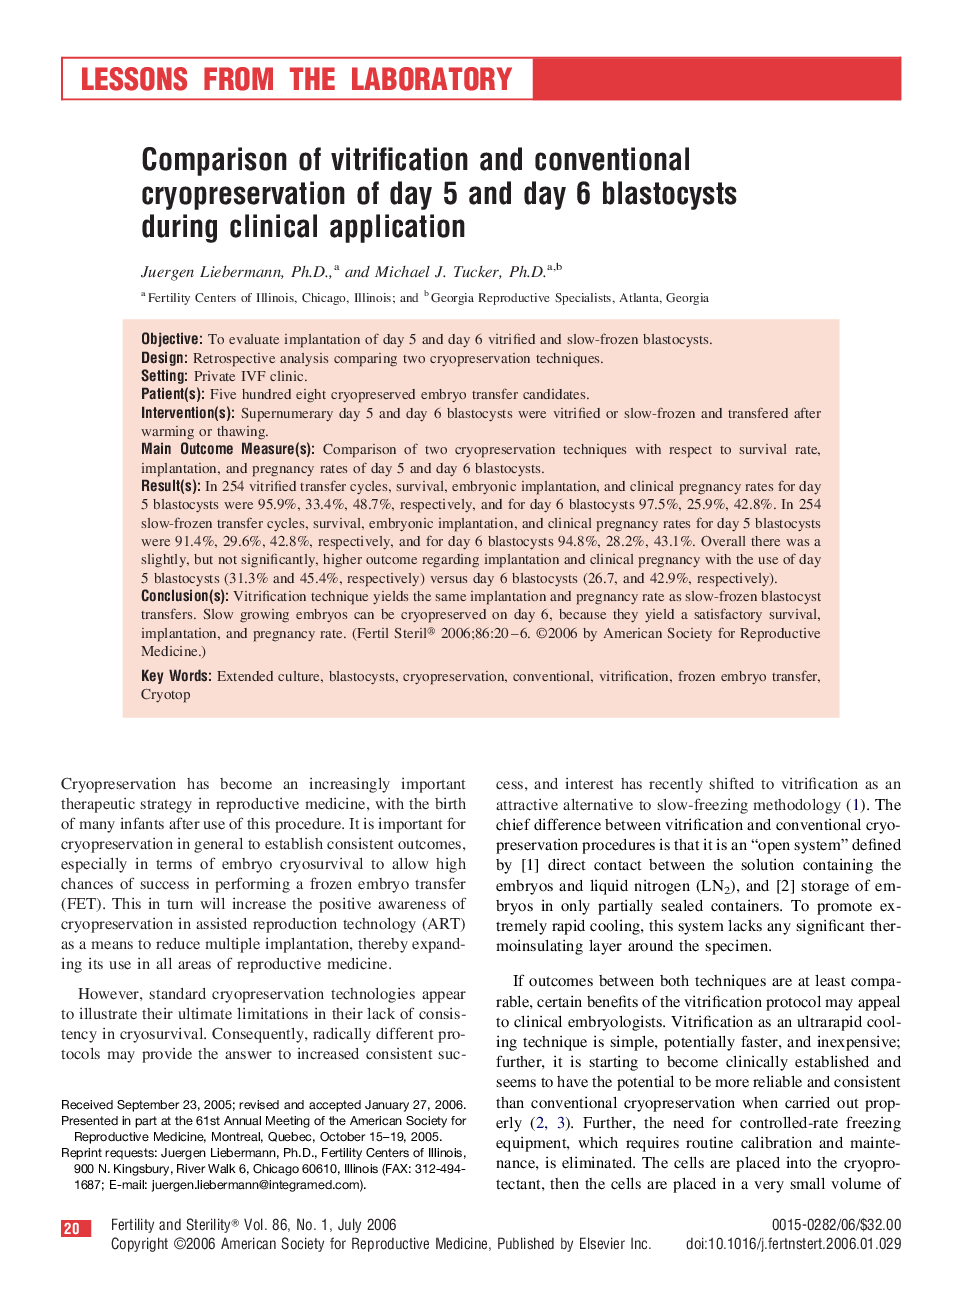 Comparison of vitrification and conventional cryopreservation of day 5 and day 6 blastocysts during clinical application